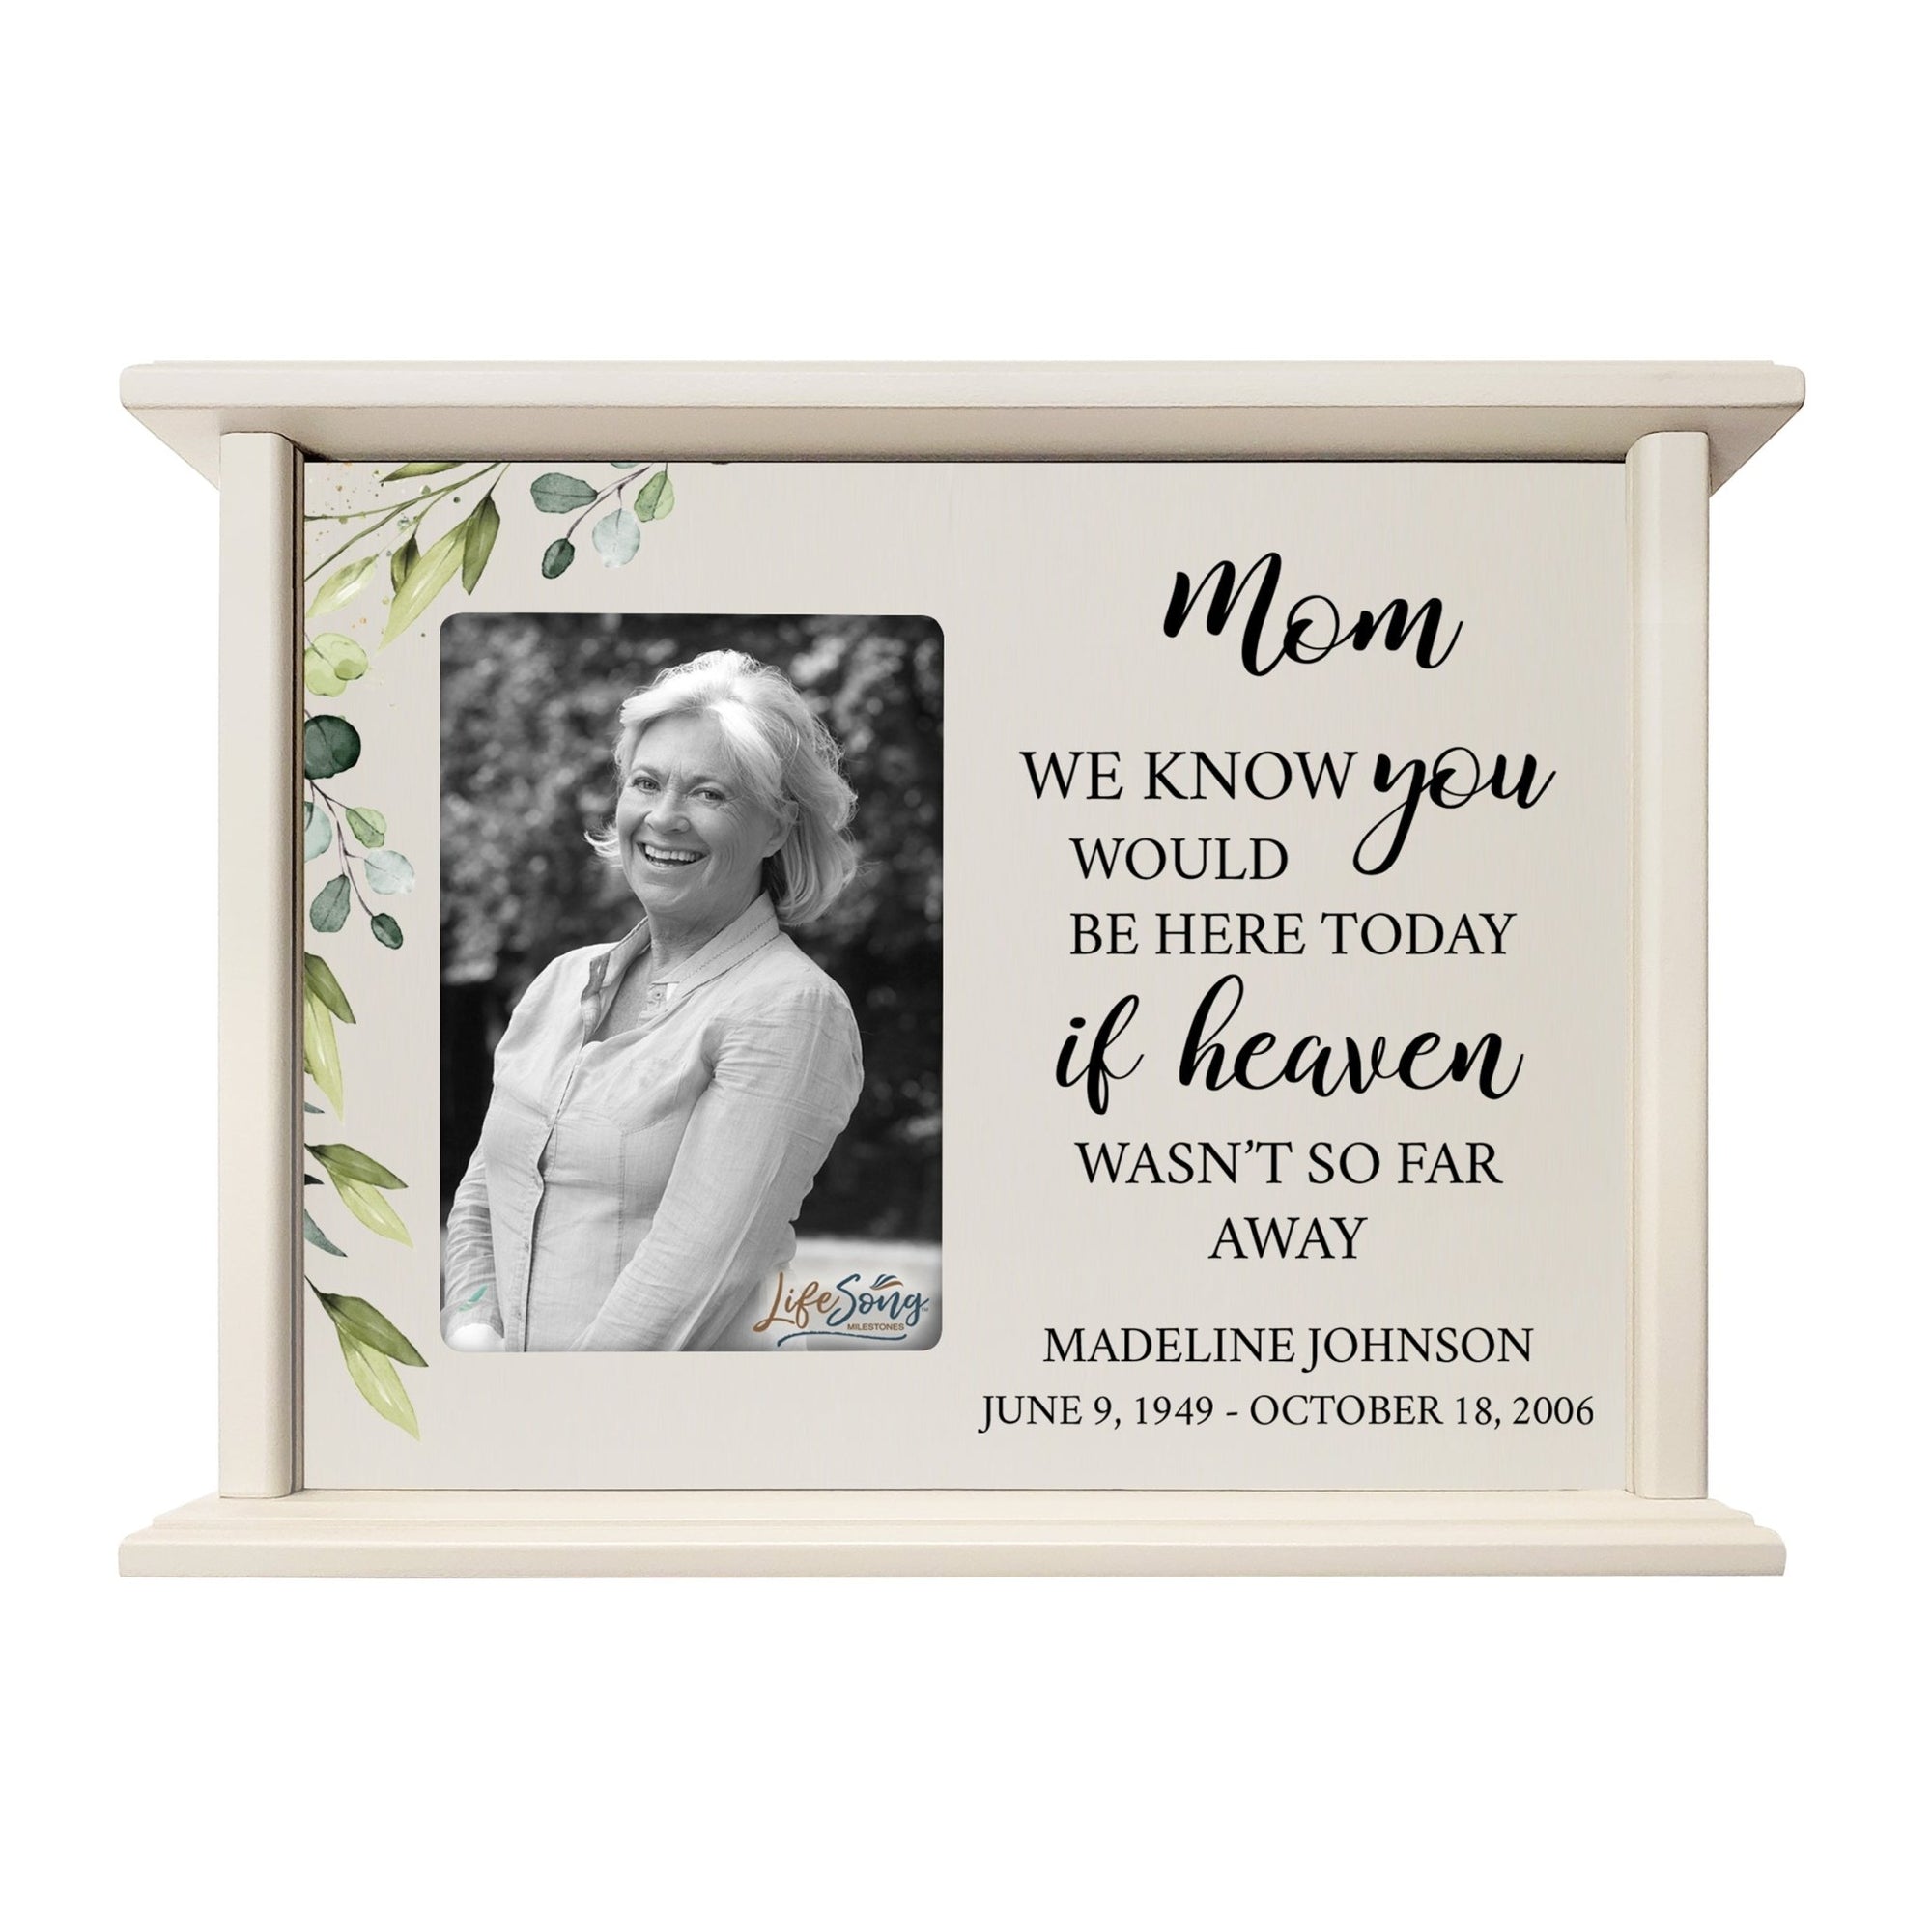 Personalized Memorial Cherry Wood 12 x 4.5 x 9 Cremation Urn Box with Picture Frame holds 200 cu in of Human Ashes and 4x6 Photo - We Know You Would (Ivory) - LifeSong Milestones